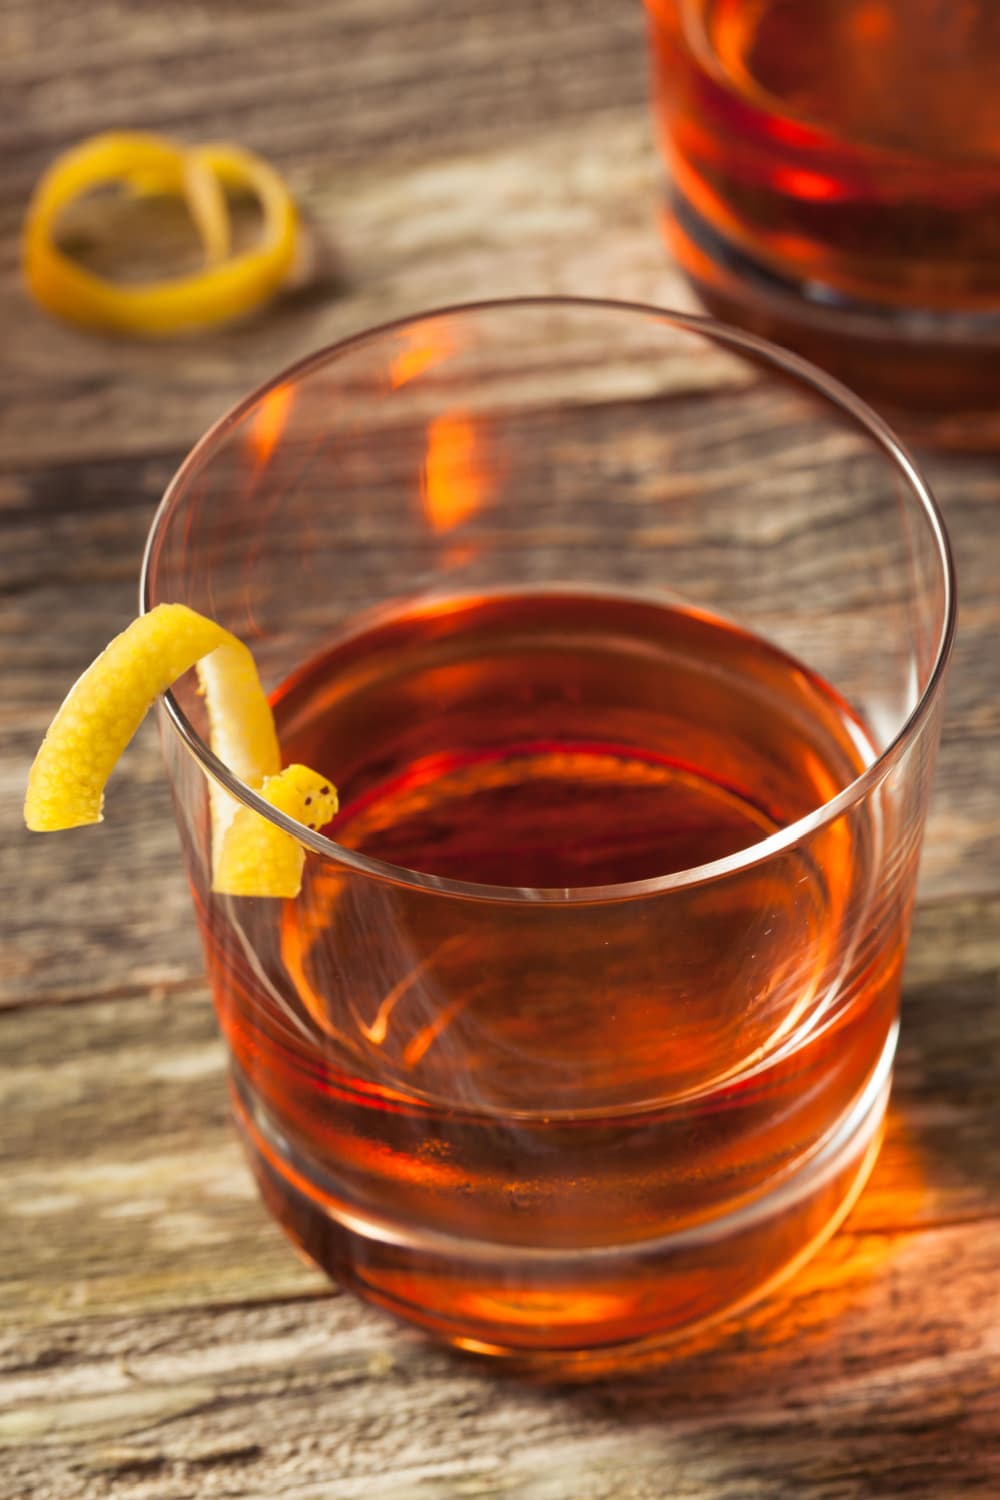 Sazerac Cocktail on an old fashioned glass on a wooden table garnished with lemon peel